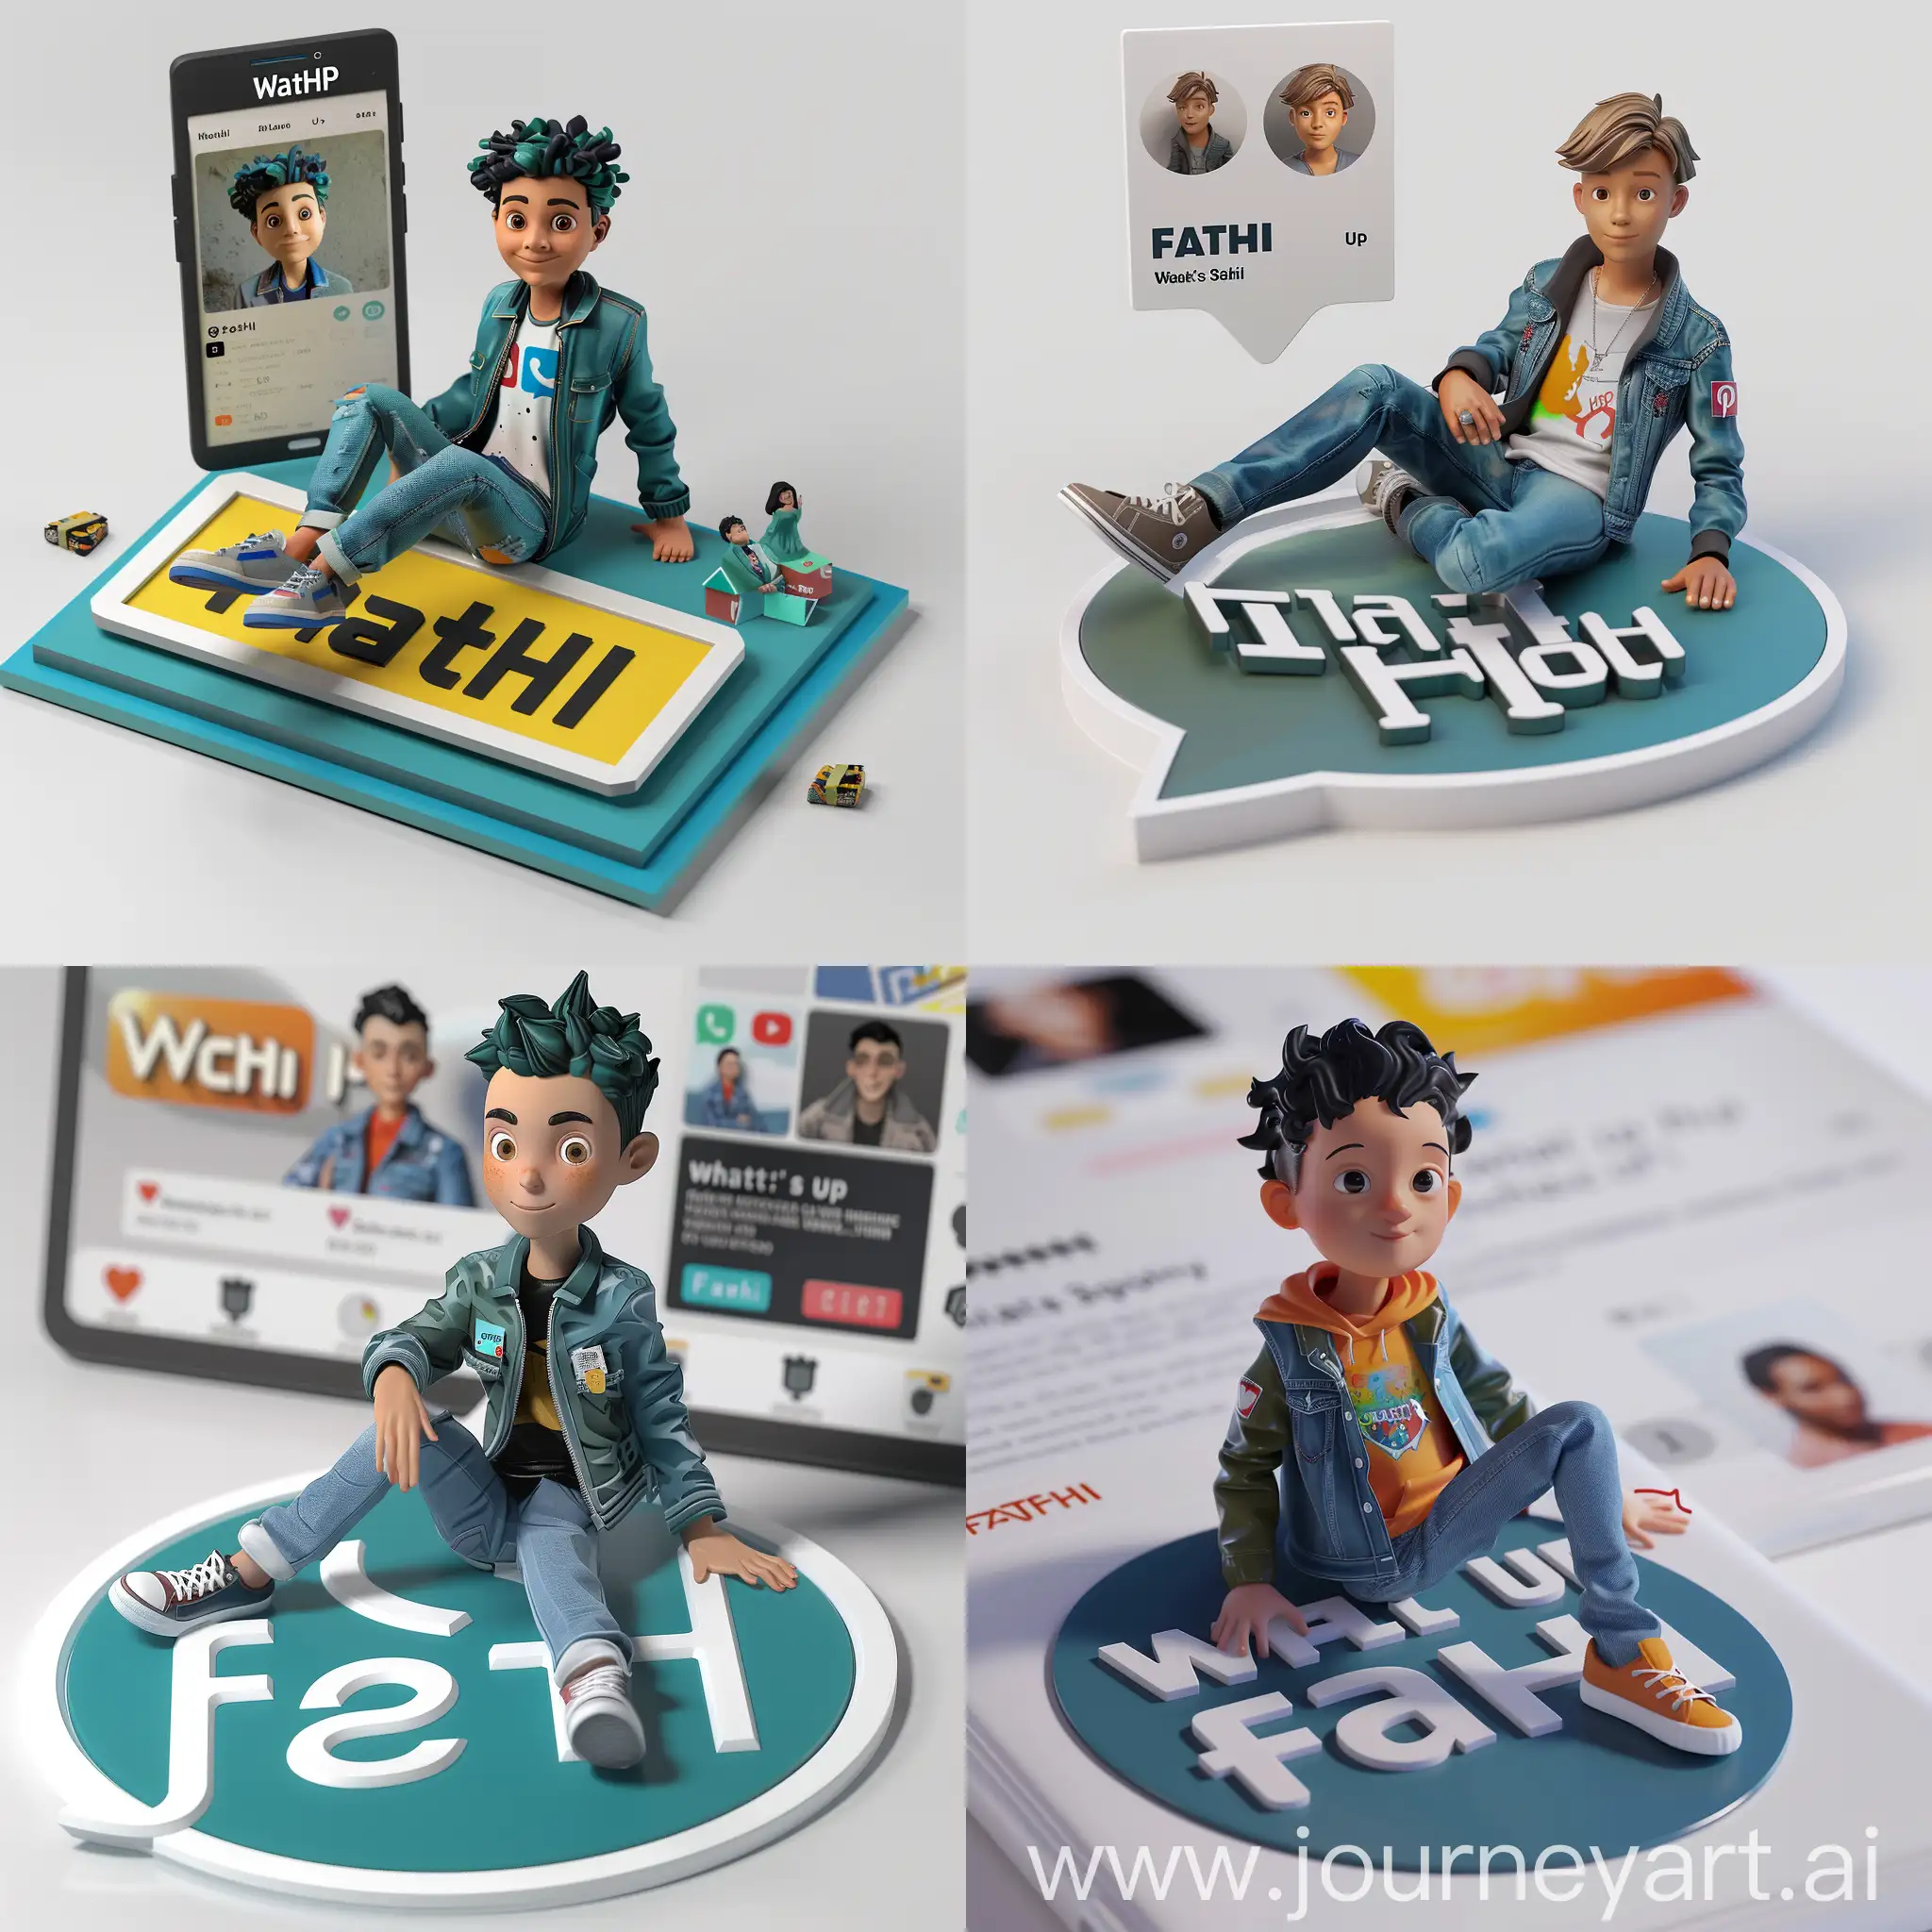 Create a 3D illustration of an animated character sitting casually on top of a social media logo "whats up". The character must wear casual modern clothing such as jeans jacket and sneakers shoes. The background of the image is a social media profile page with a user name "FATEHI" and a profile picture that match.